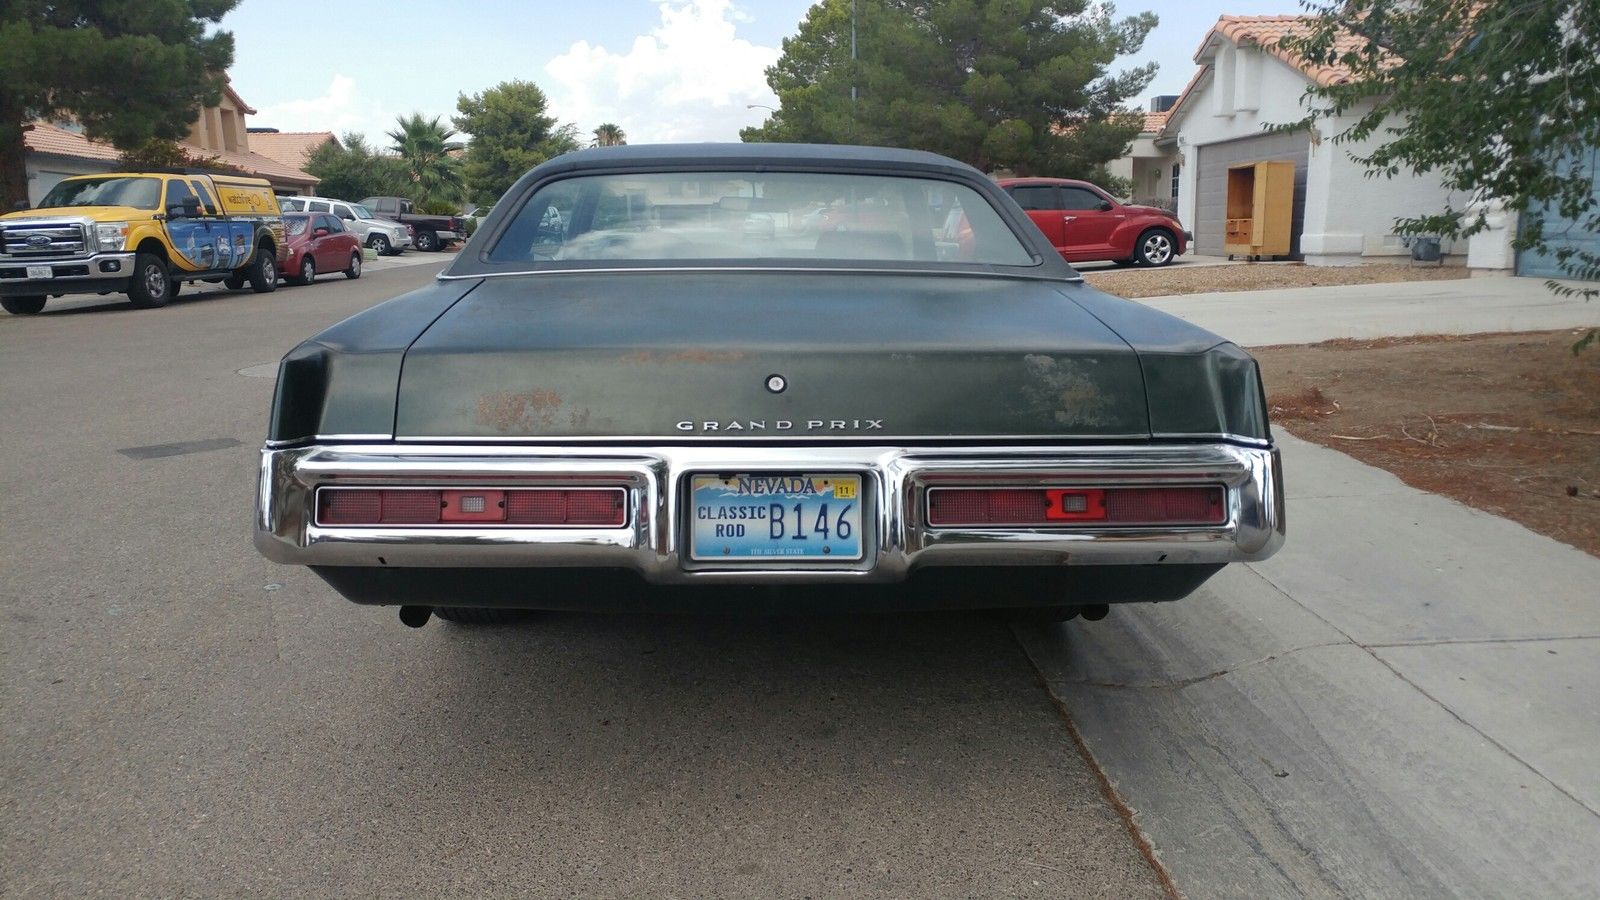 Comfy Cruiser Or Muscle Monster? Why Not Both With This 1969 Pontiac Grand Prix Model J?